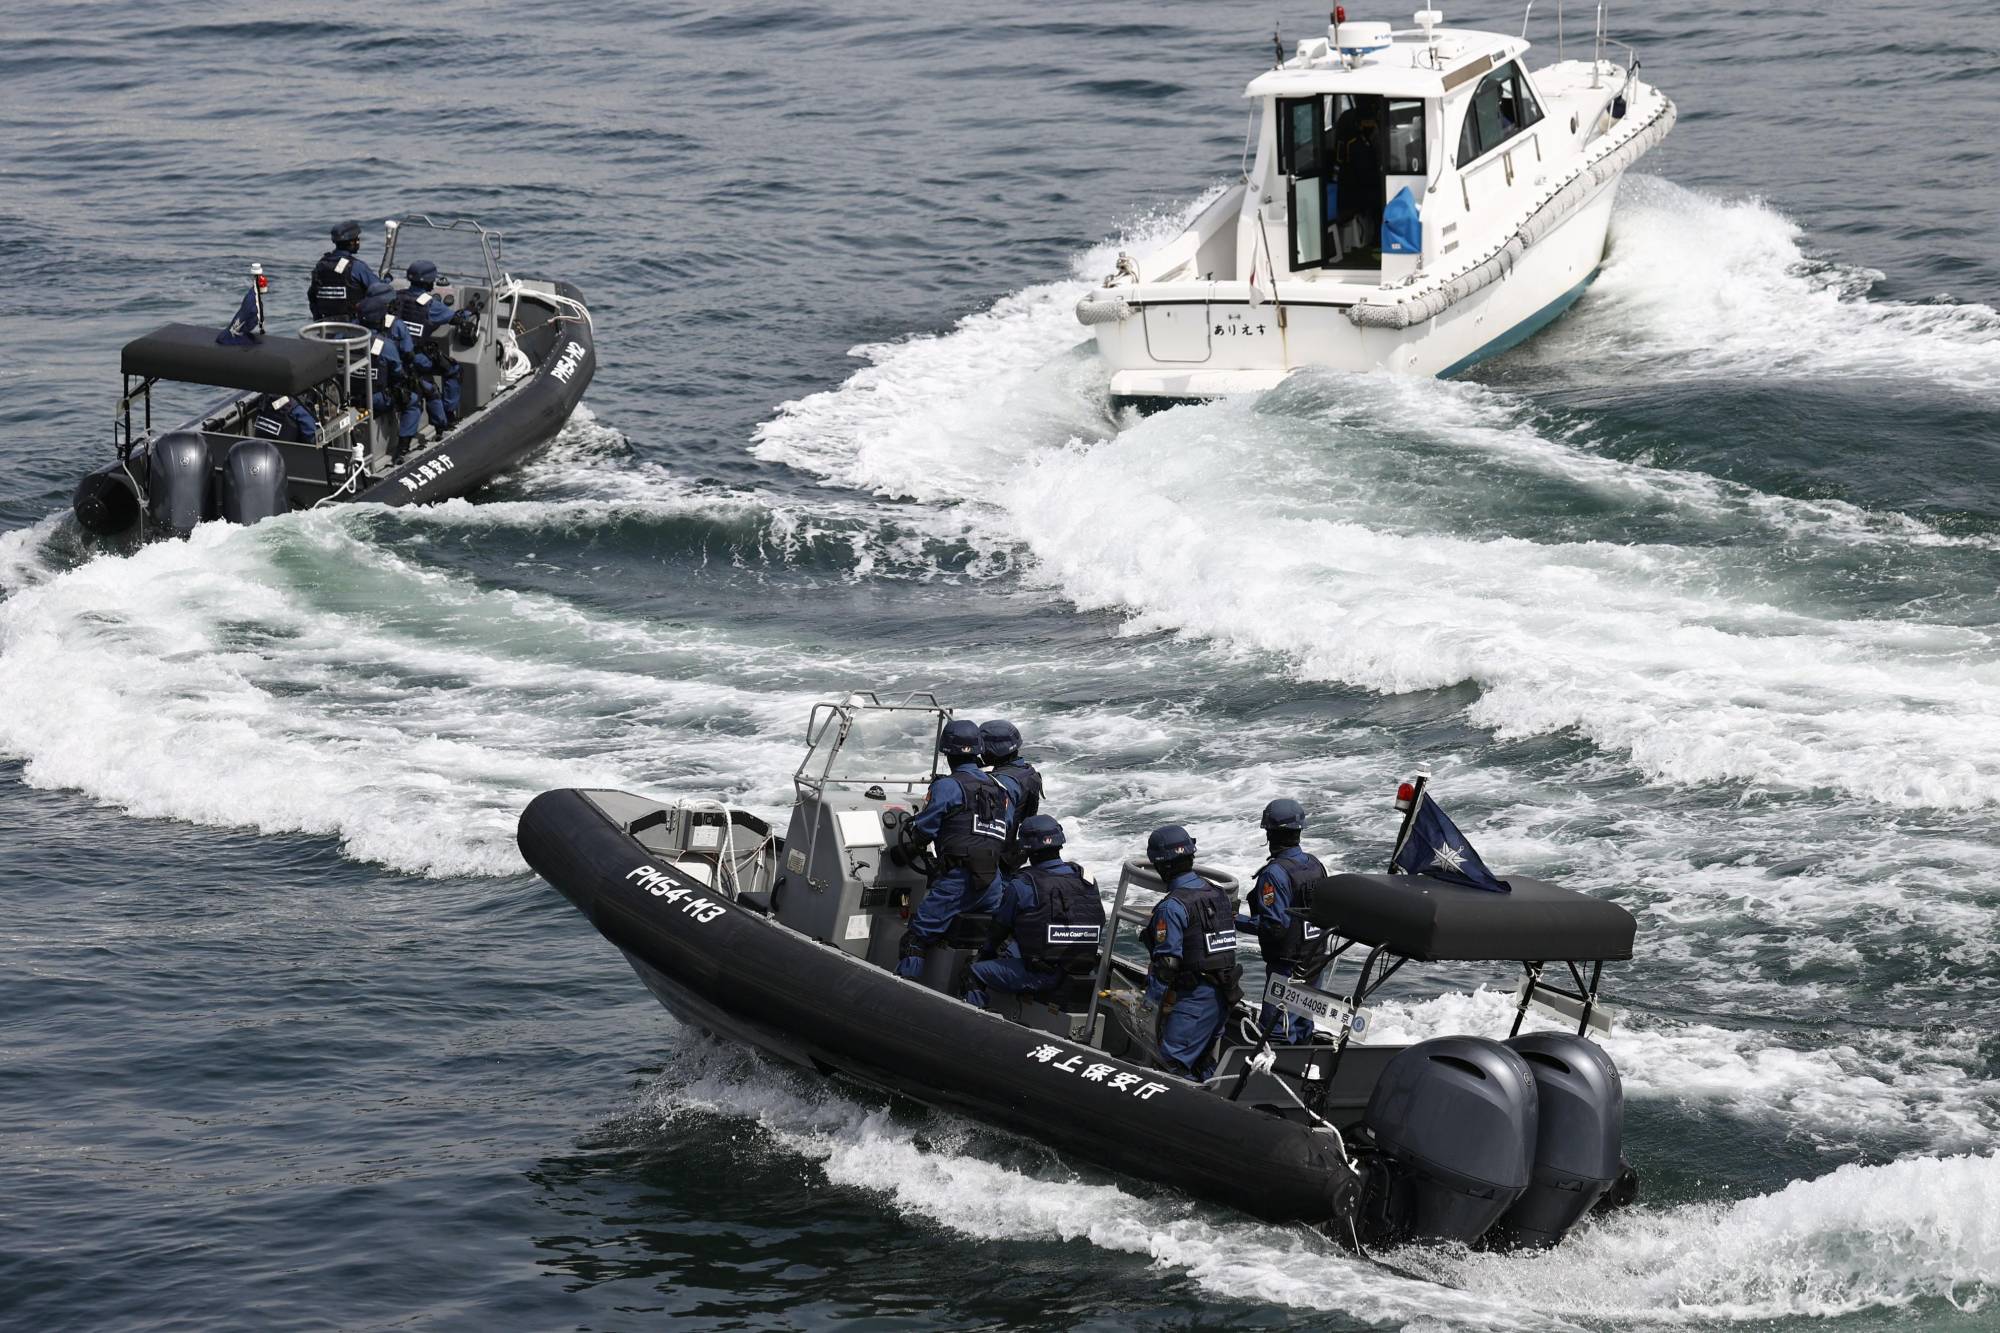 A maritime safety drill is held in March at Hiroshima Port in Hiroshima for a Group of Seven summit meeting scheduled in the city in May. | KYODO